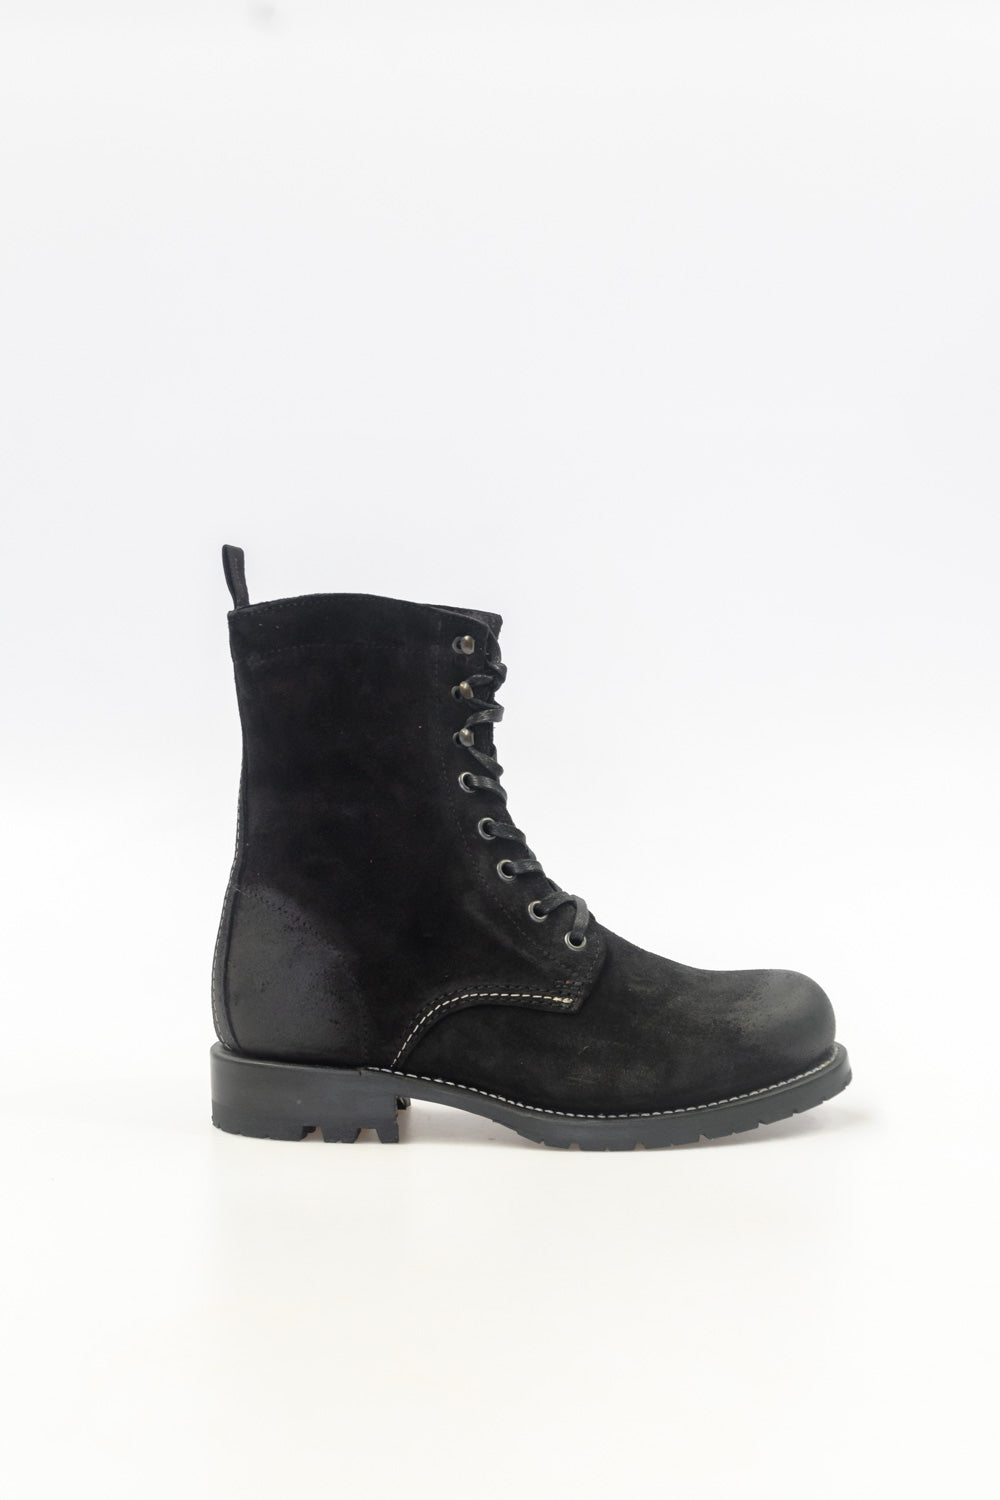 Leather Lace Up Boots MERLA MOTO